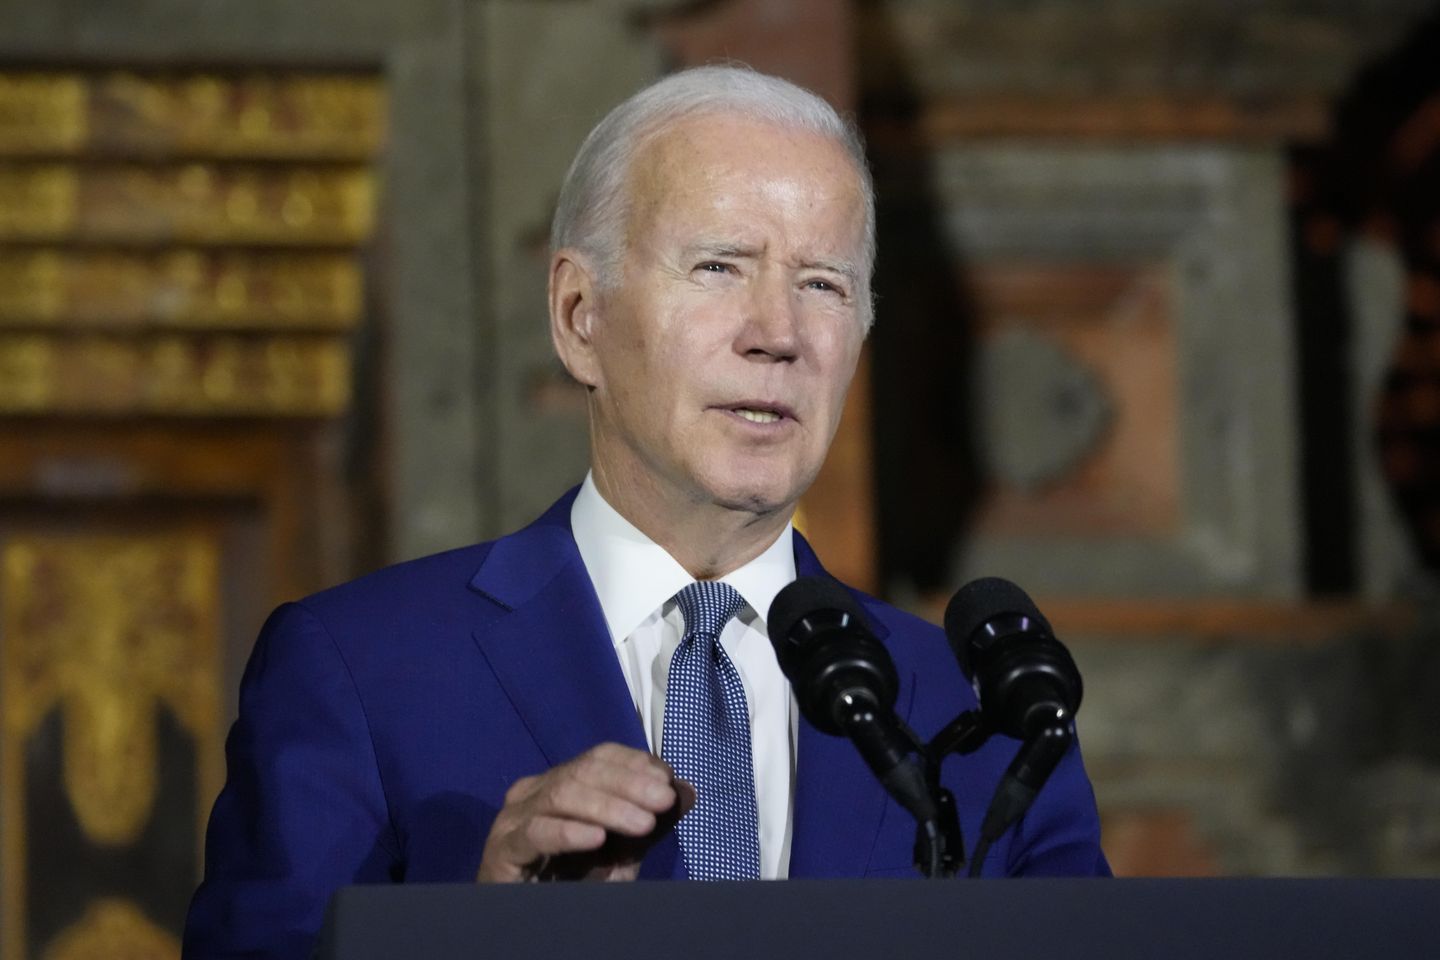 NLRB's Joe Biden allies clear path for unions to organize without secret ballots